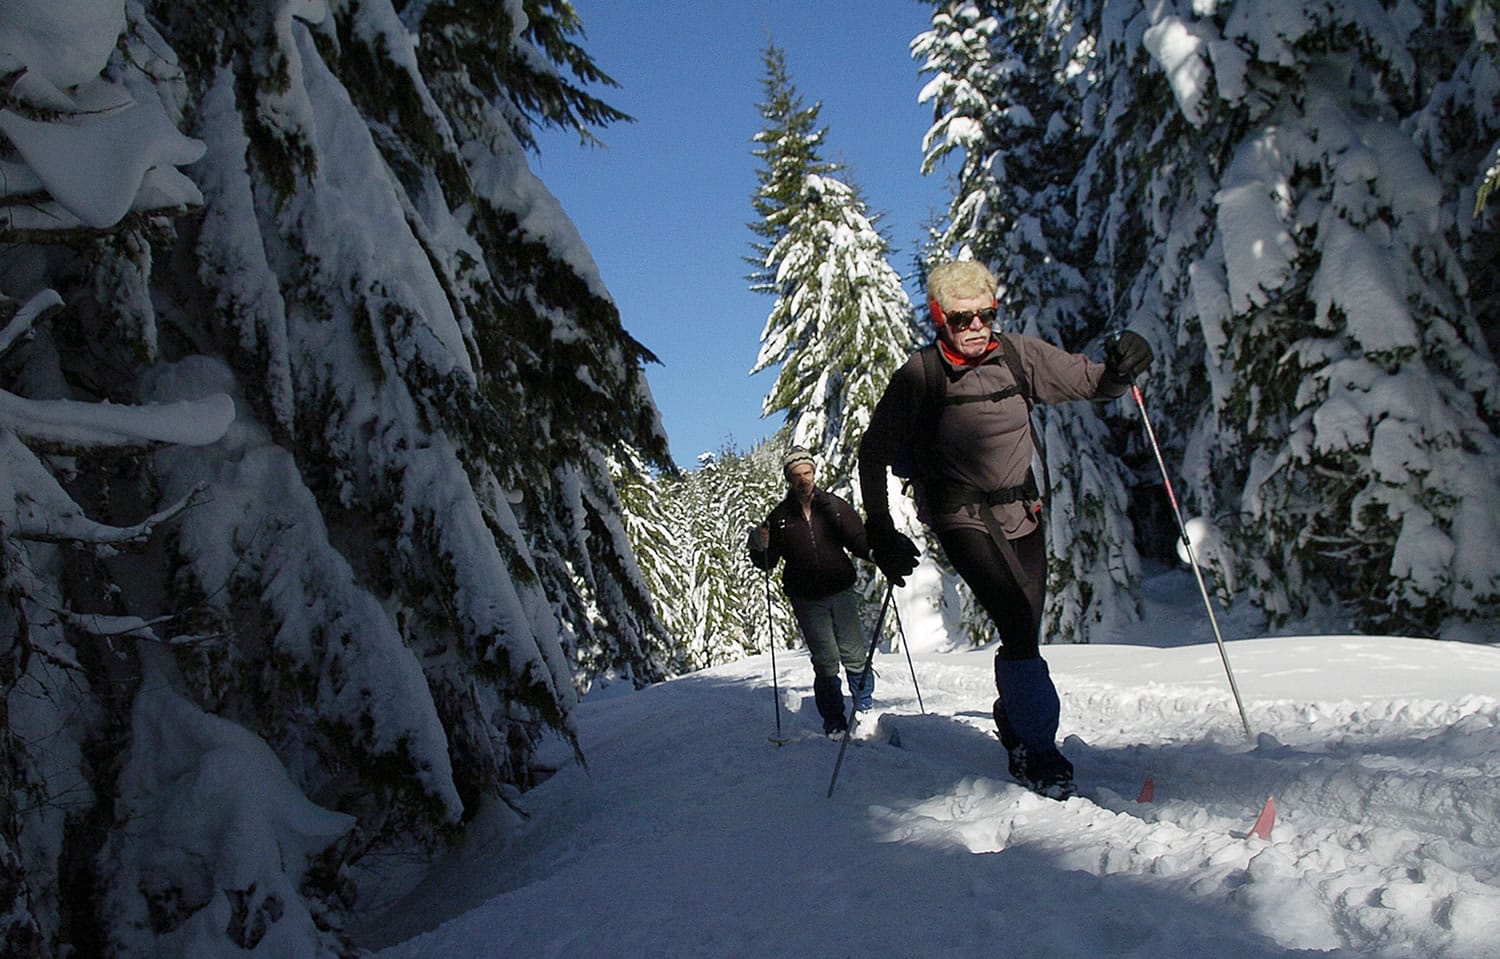 It's easy to overdress in winter if doing highly aerobic activities such as cross-country skiing.